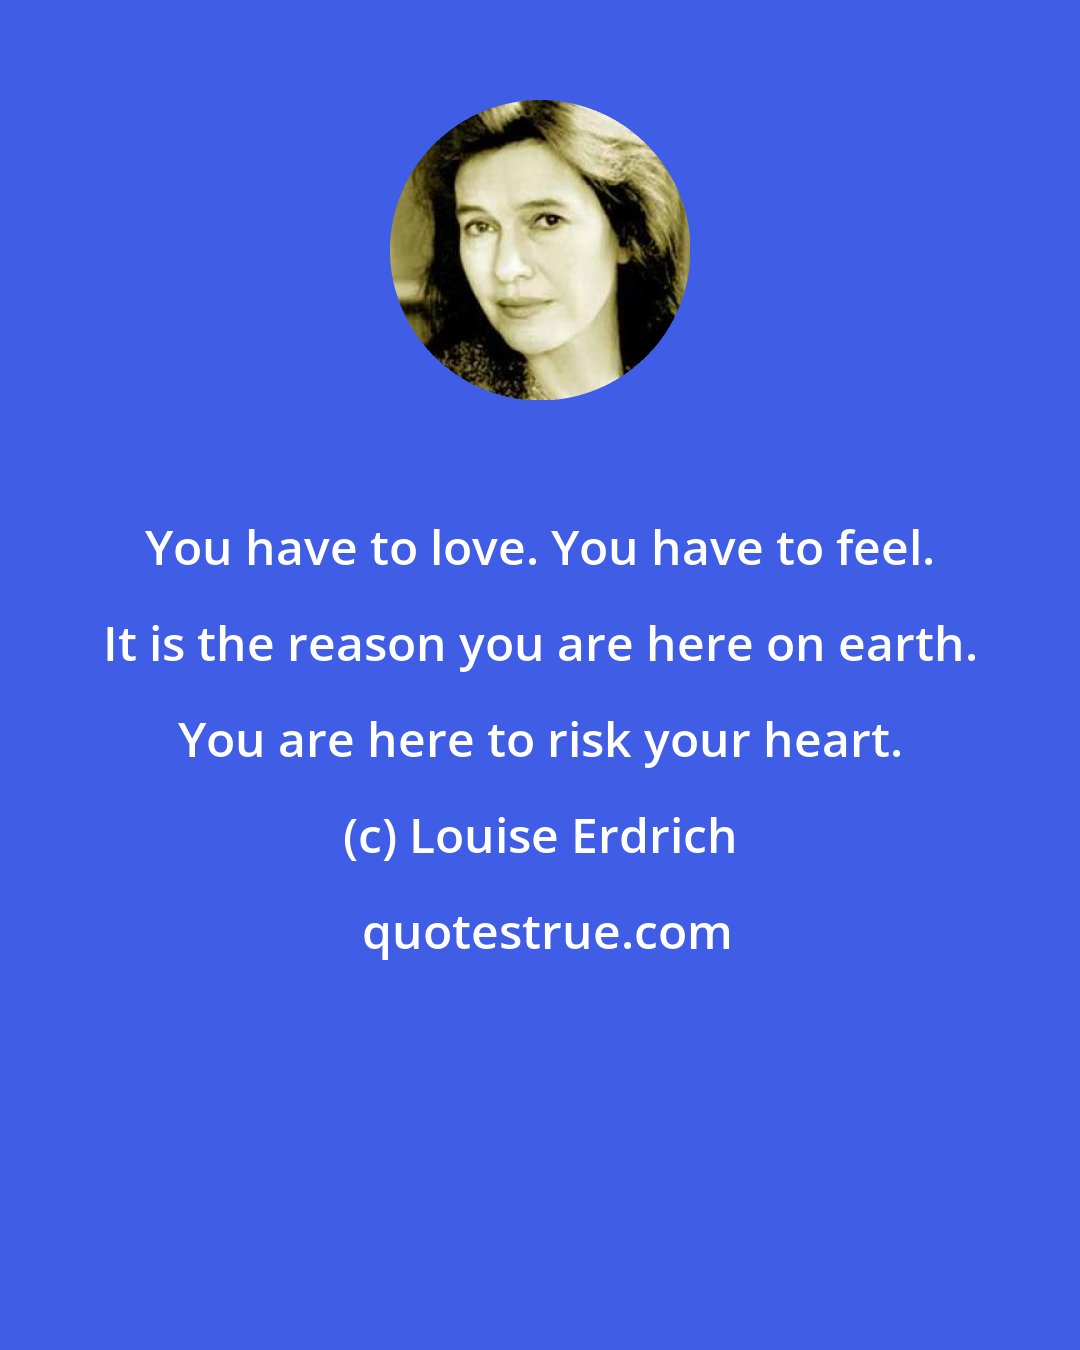 Louise Erdrich: You have to love. You have to feel. It is the reason you are here on earth. You are here to risk your heart.